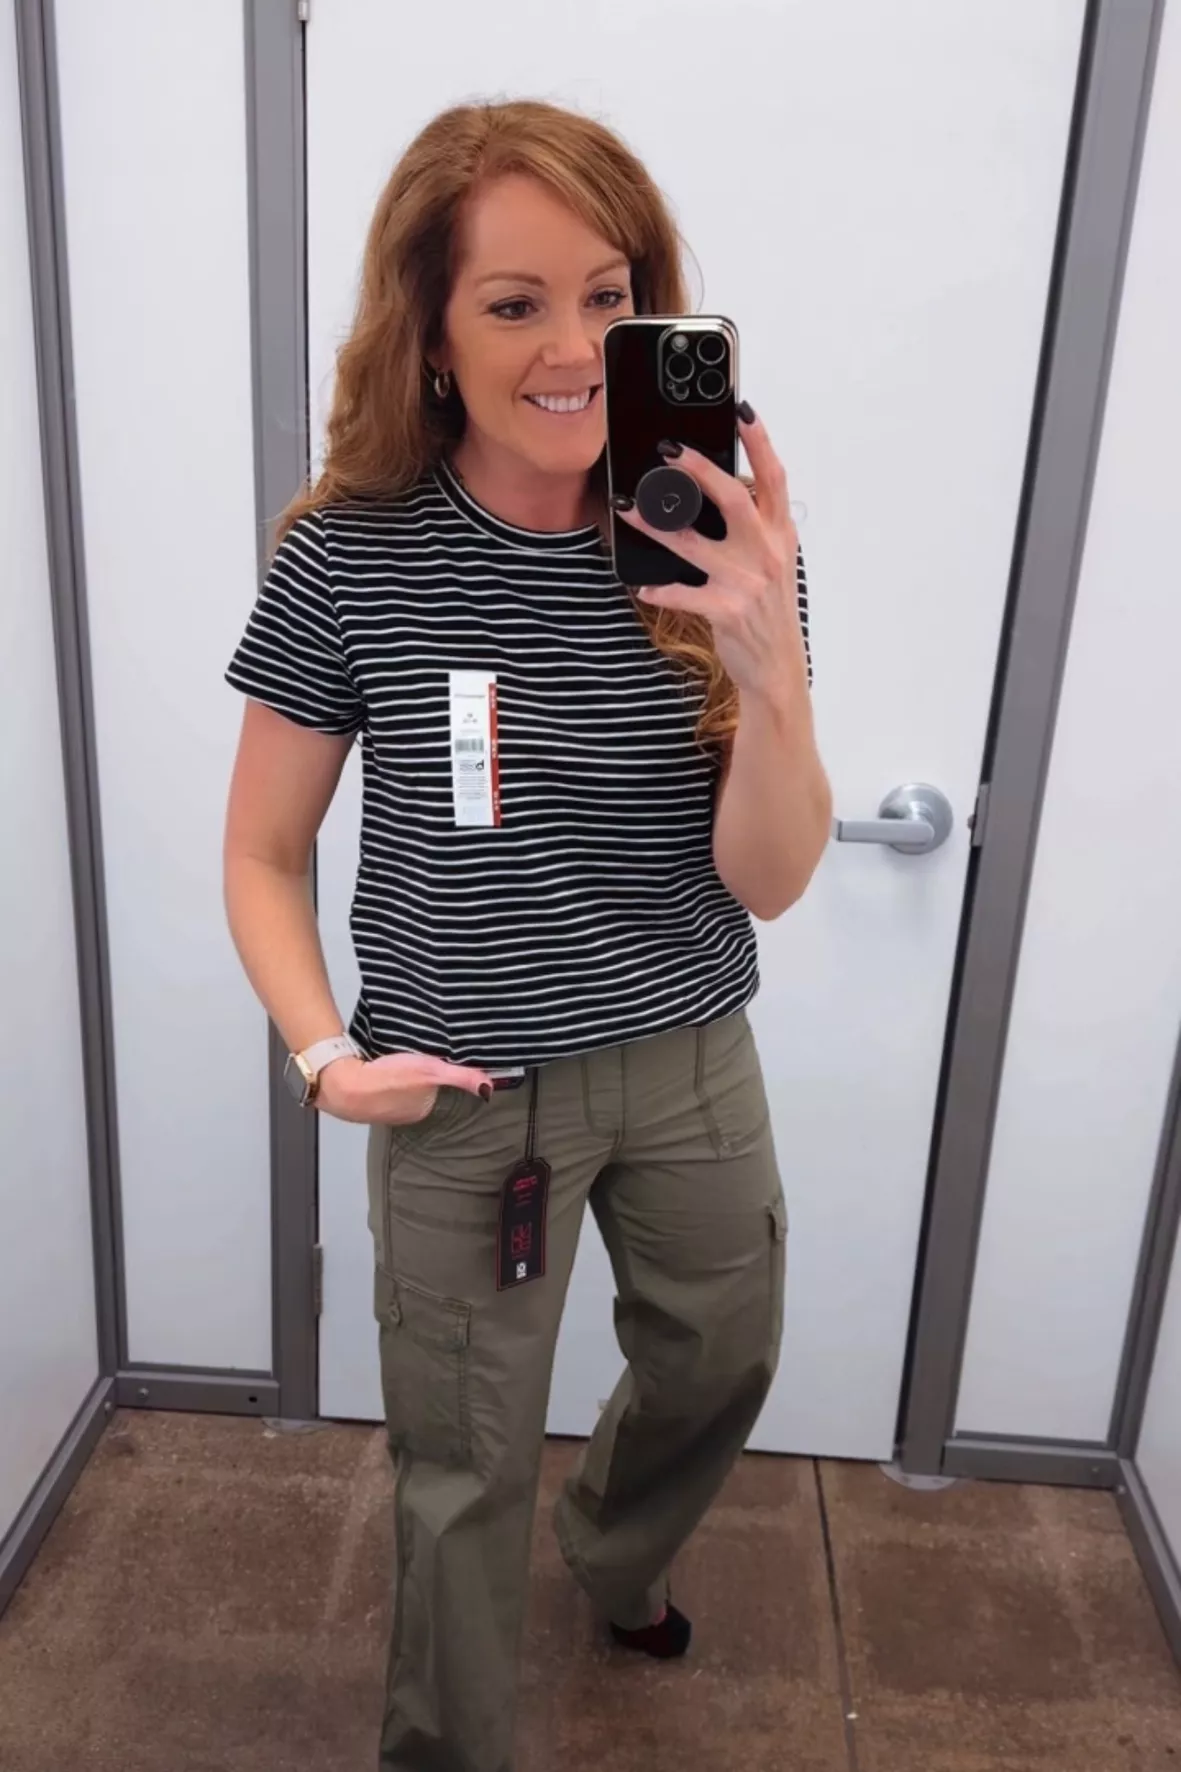 Time and Tru Women's Cargo Pants 